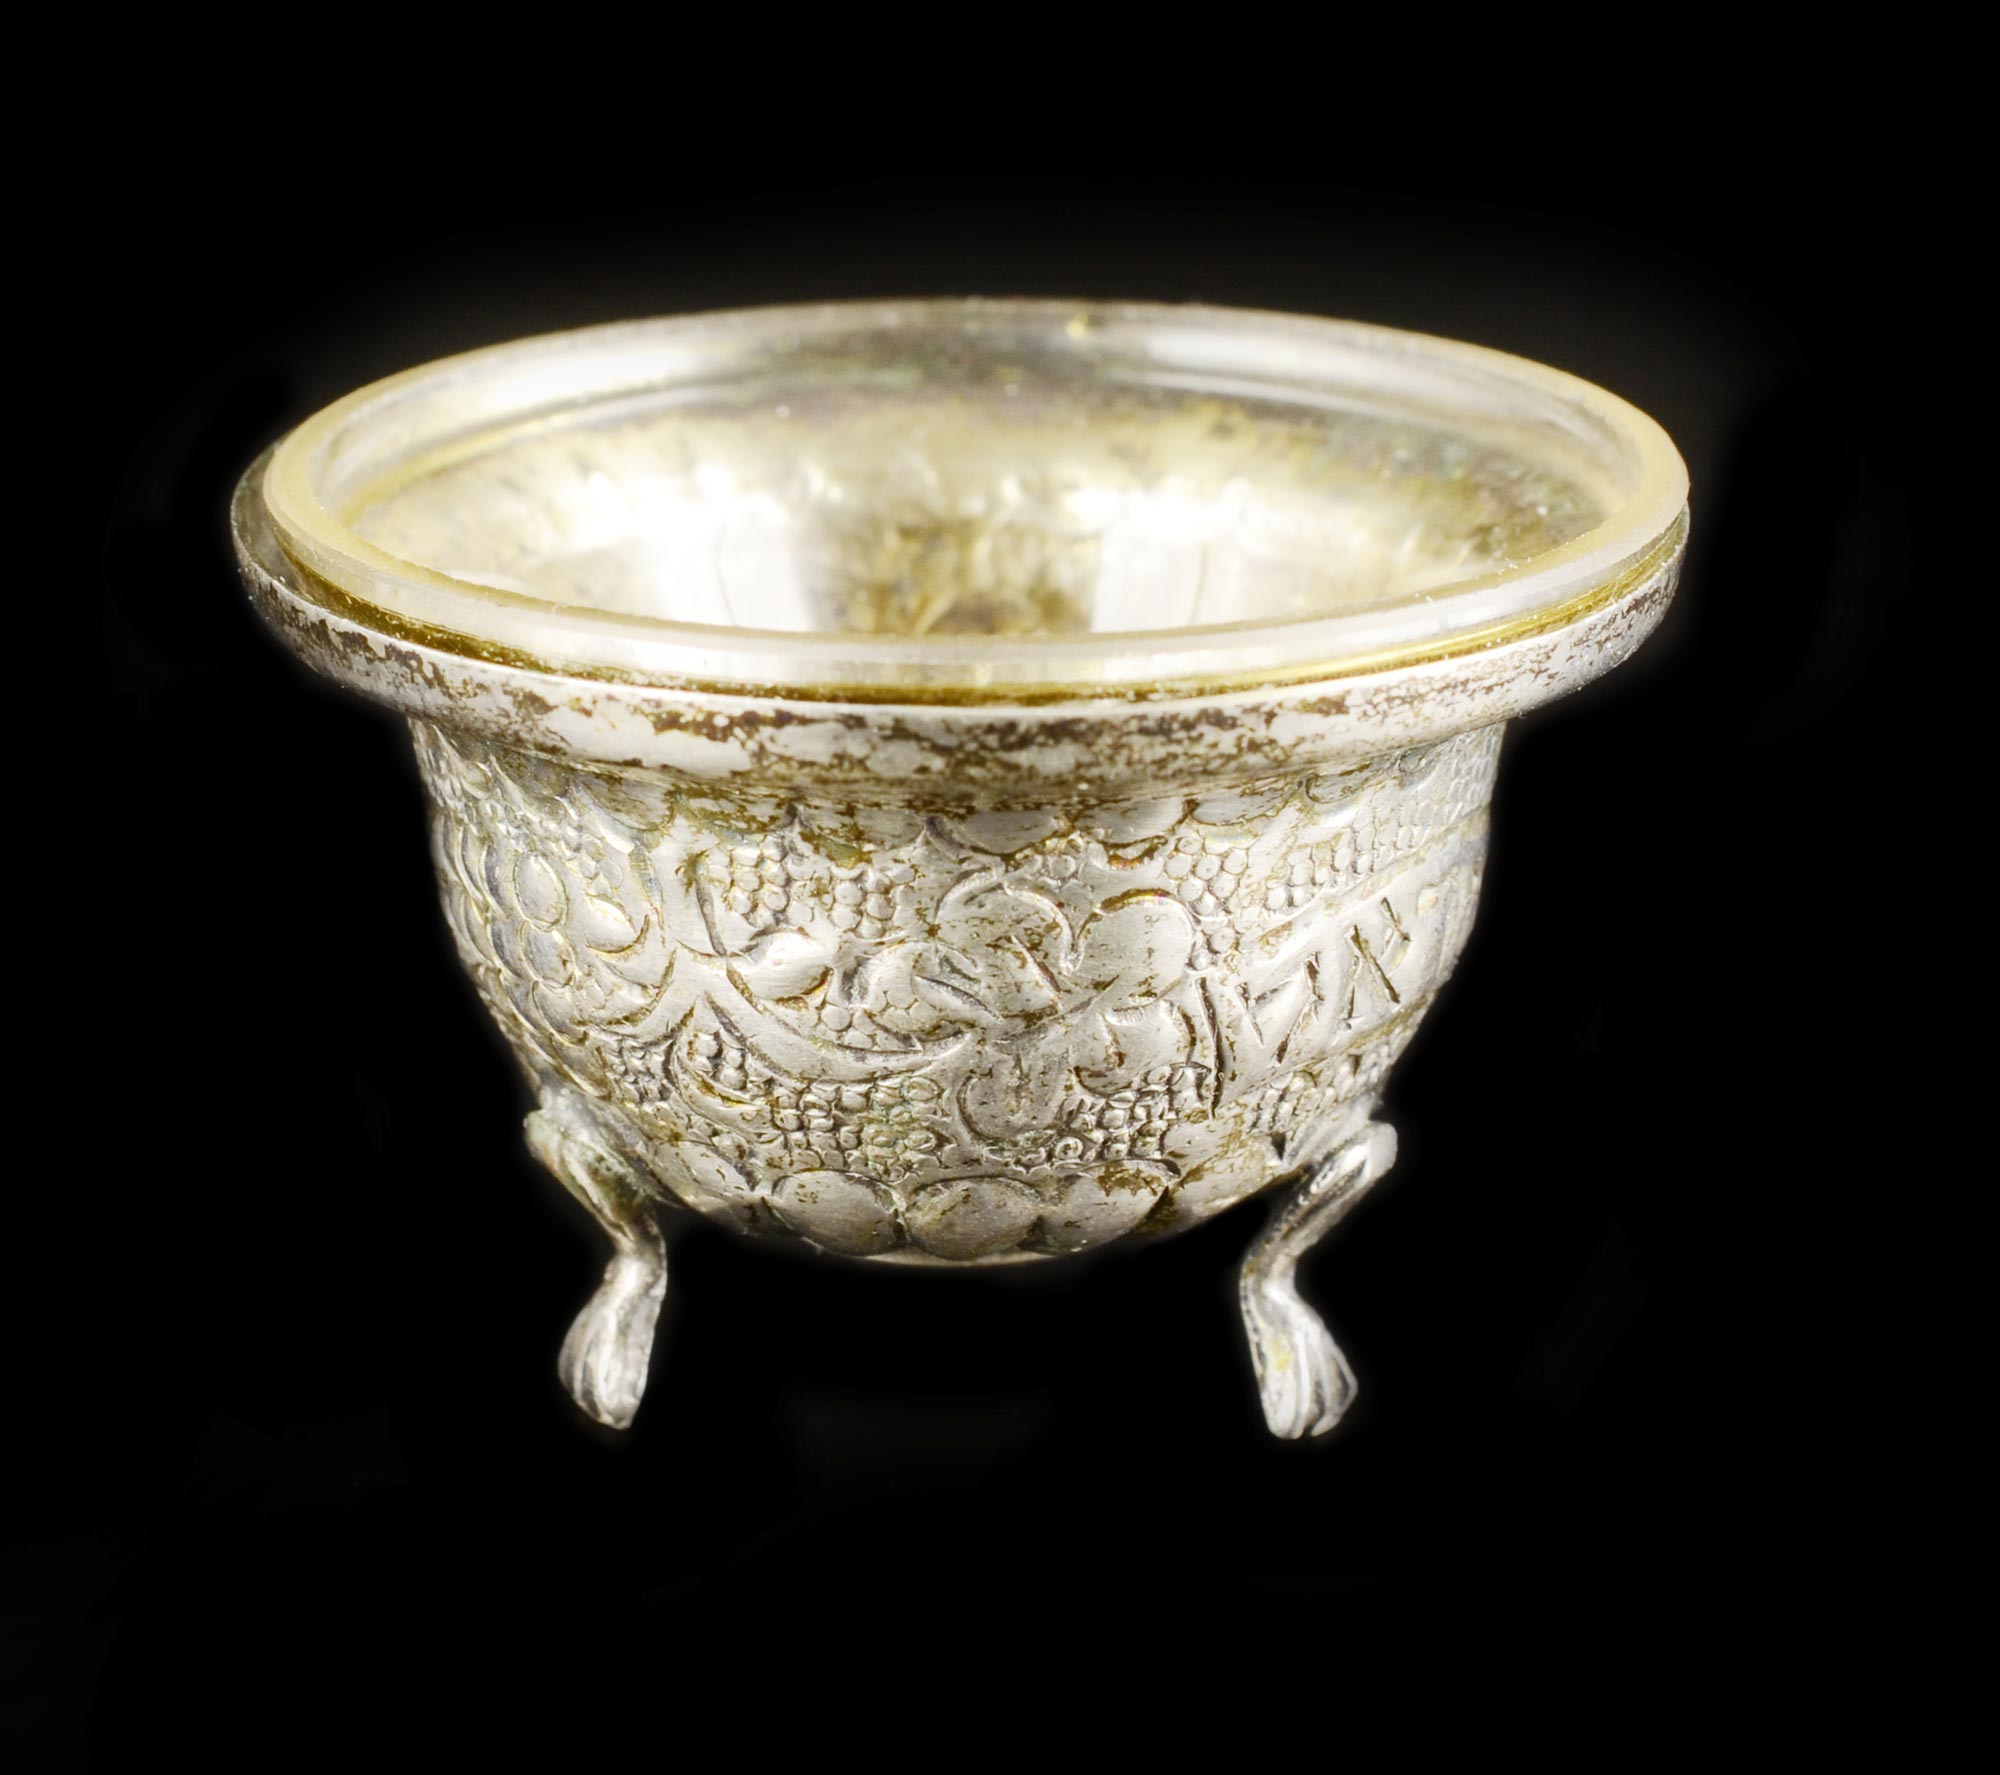 CAVIAR BOWL  Israel, 20th century. Bowl of pressed silver sheet with embossed and engraved vine